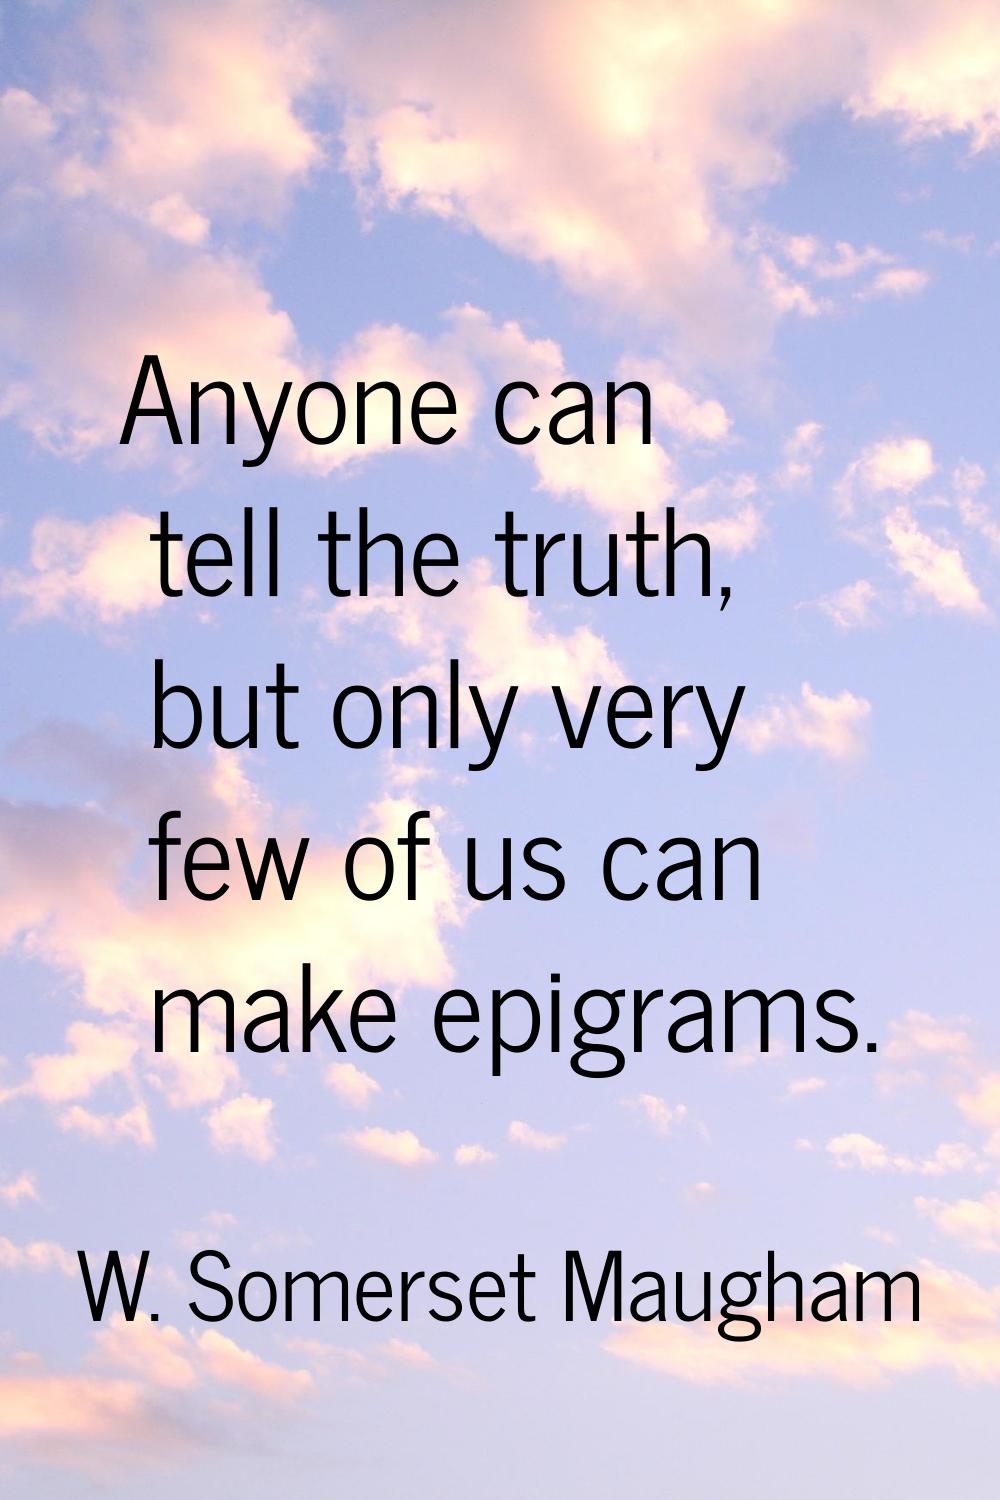 Anyone can tell the truth, but only very few of us can make epigrams.